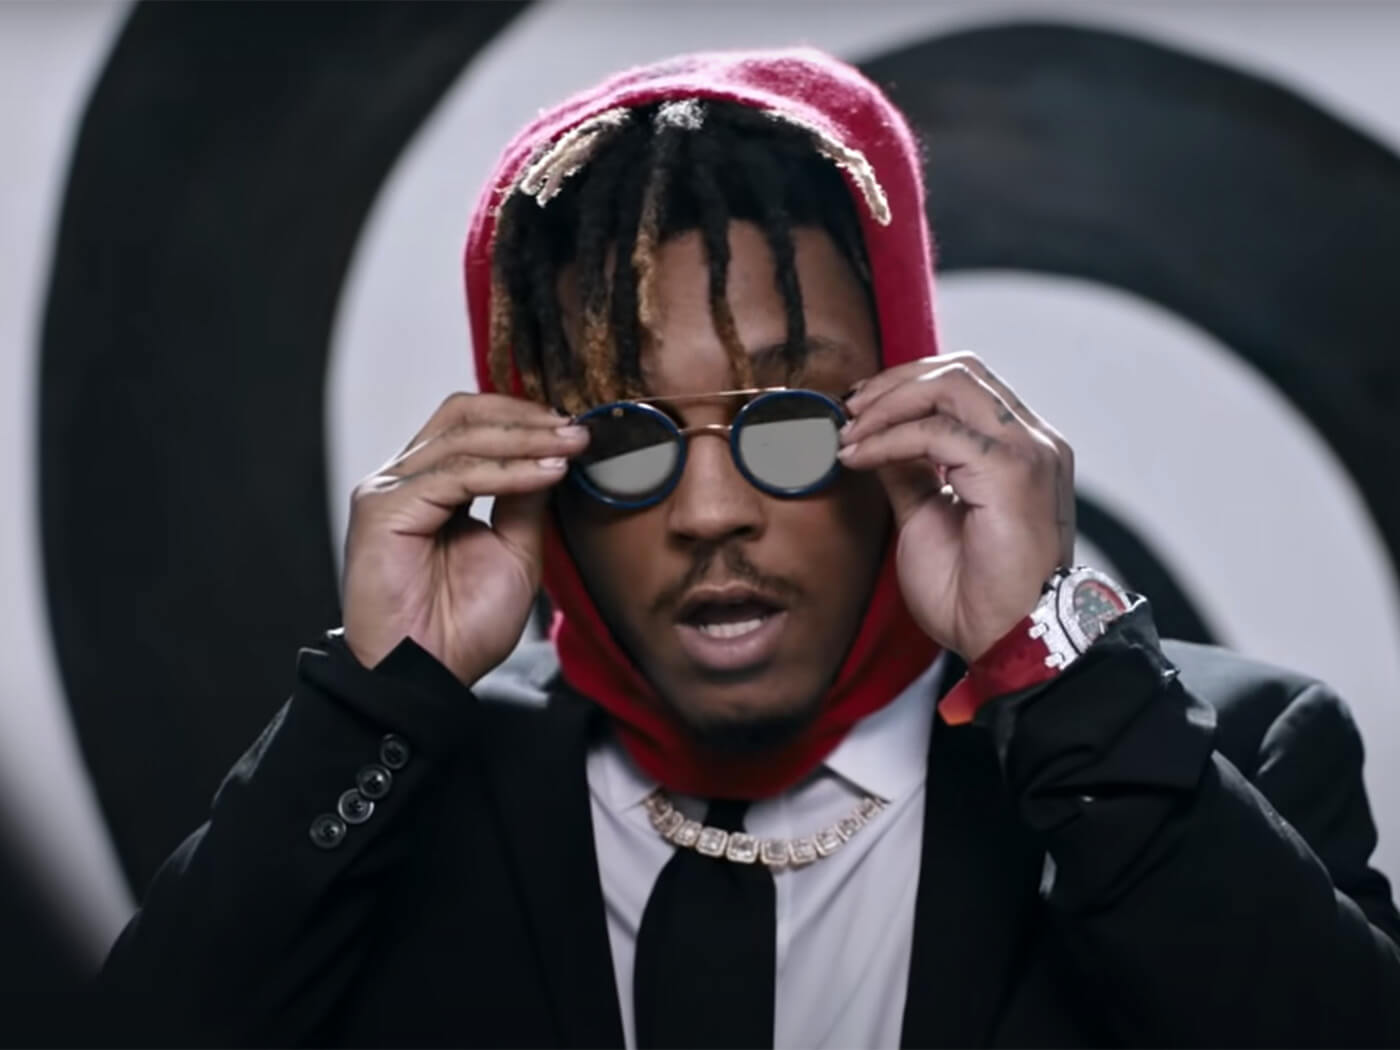 Watch Juice WRLD, Young Thug's video for “Bad Boy”